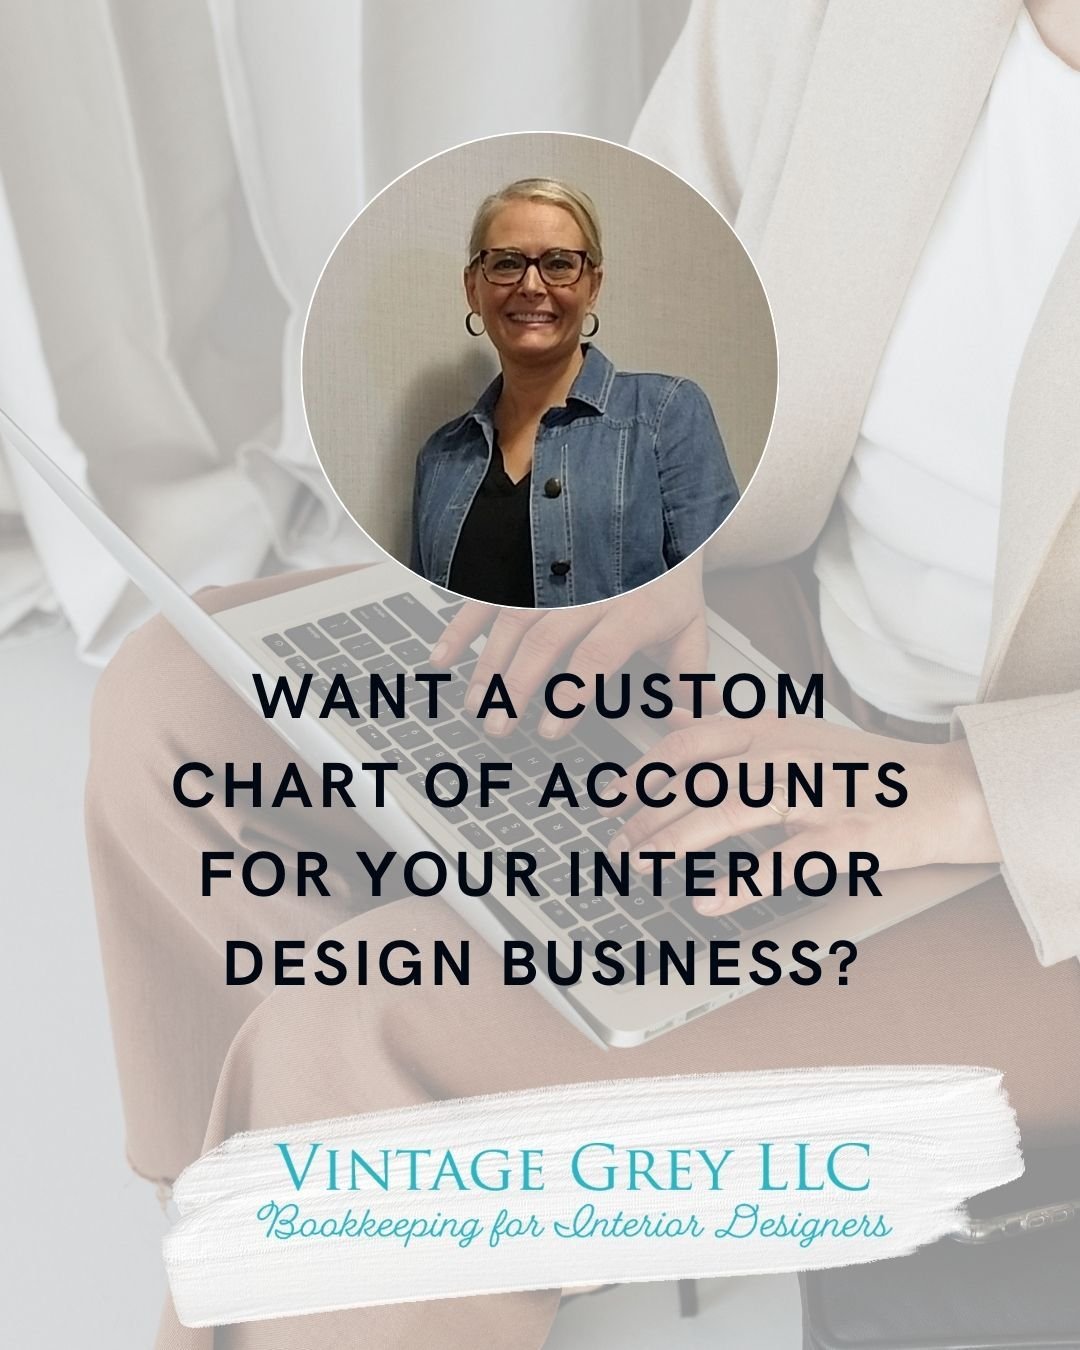 Did you know you don't actually *have* to use the default Chart of Accounts from your bookkeeping software?

The more customized your chart of accounts is, the more customized financial reporting you can do! 📊

Imagine looking at your financial repo